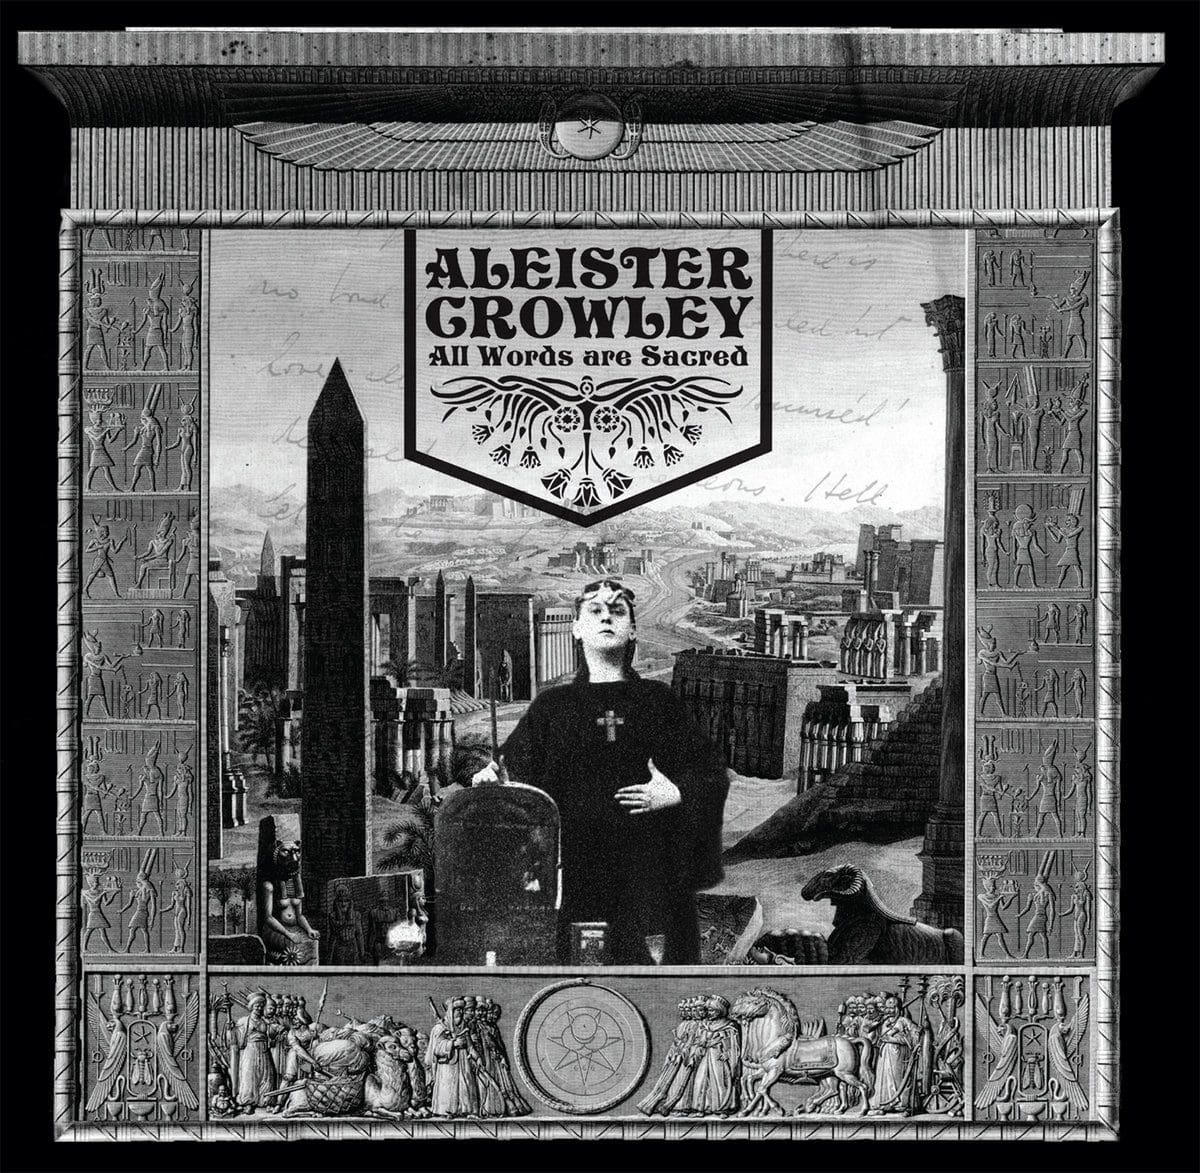 Wax cylinder recordings 1910-1914 from Aleister Crowley remastered and released on 'All Words Are Sacred' MCD